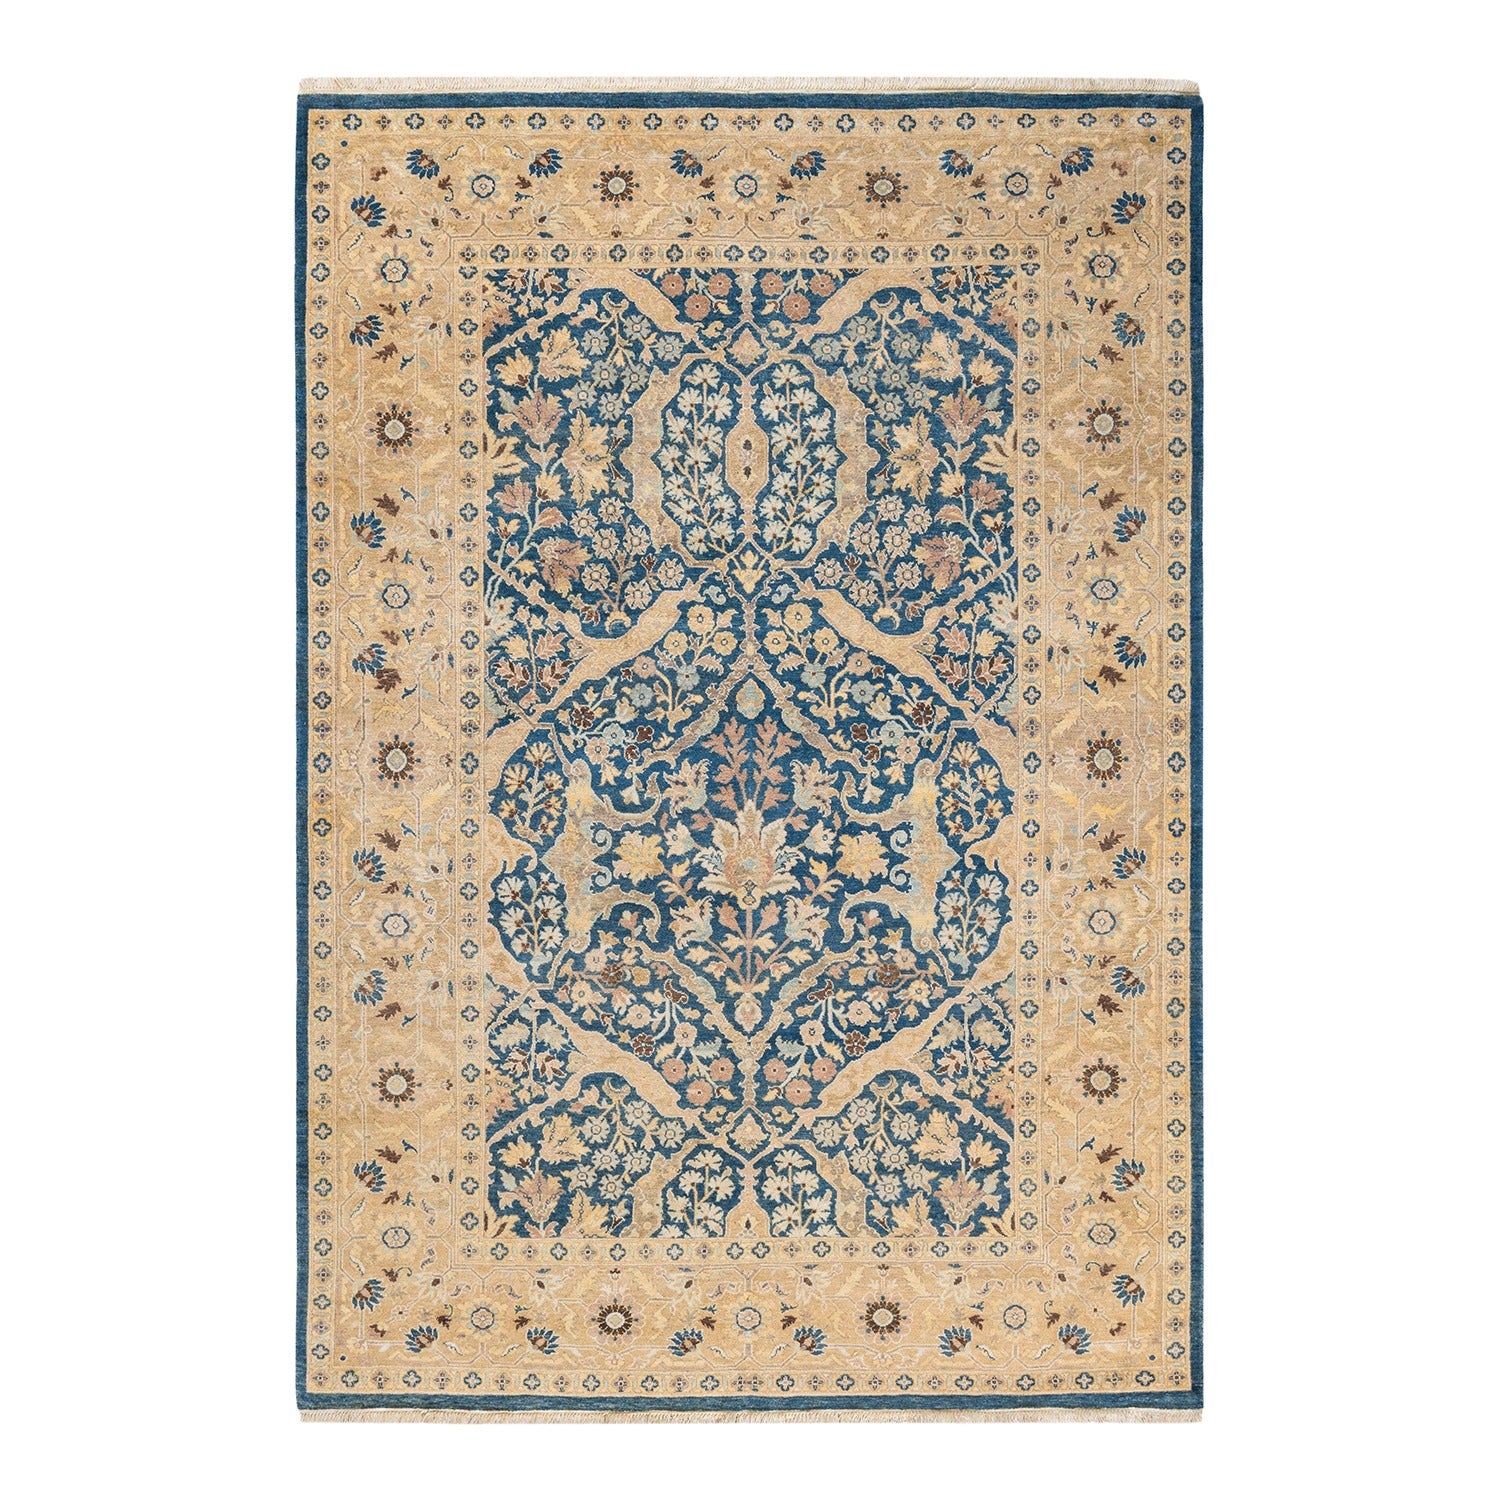 Traditional ornamental rug with intricate patterns in dominant blue and beige.